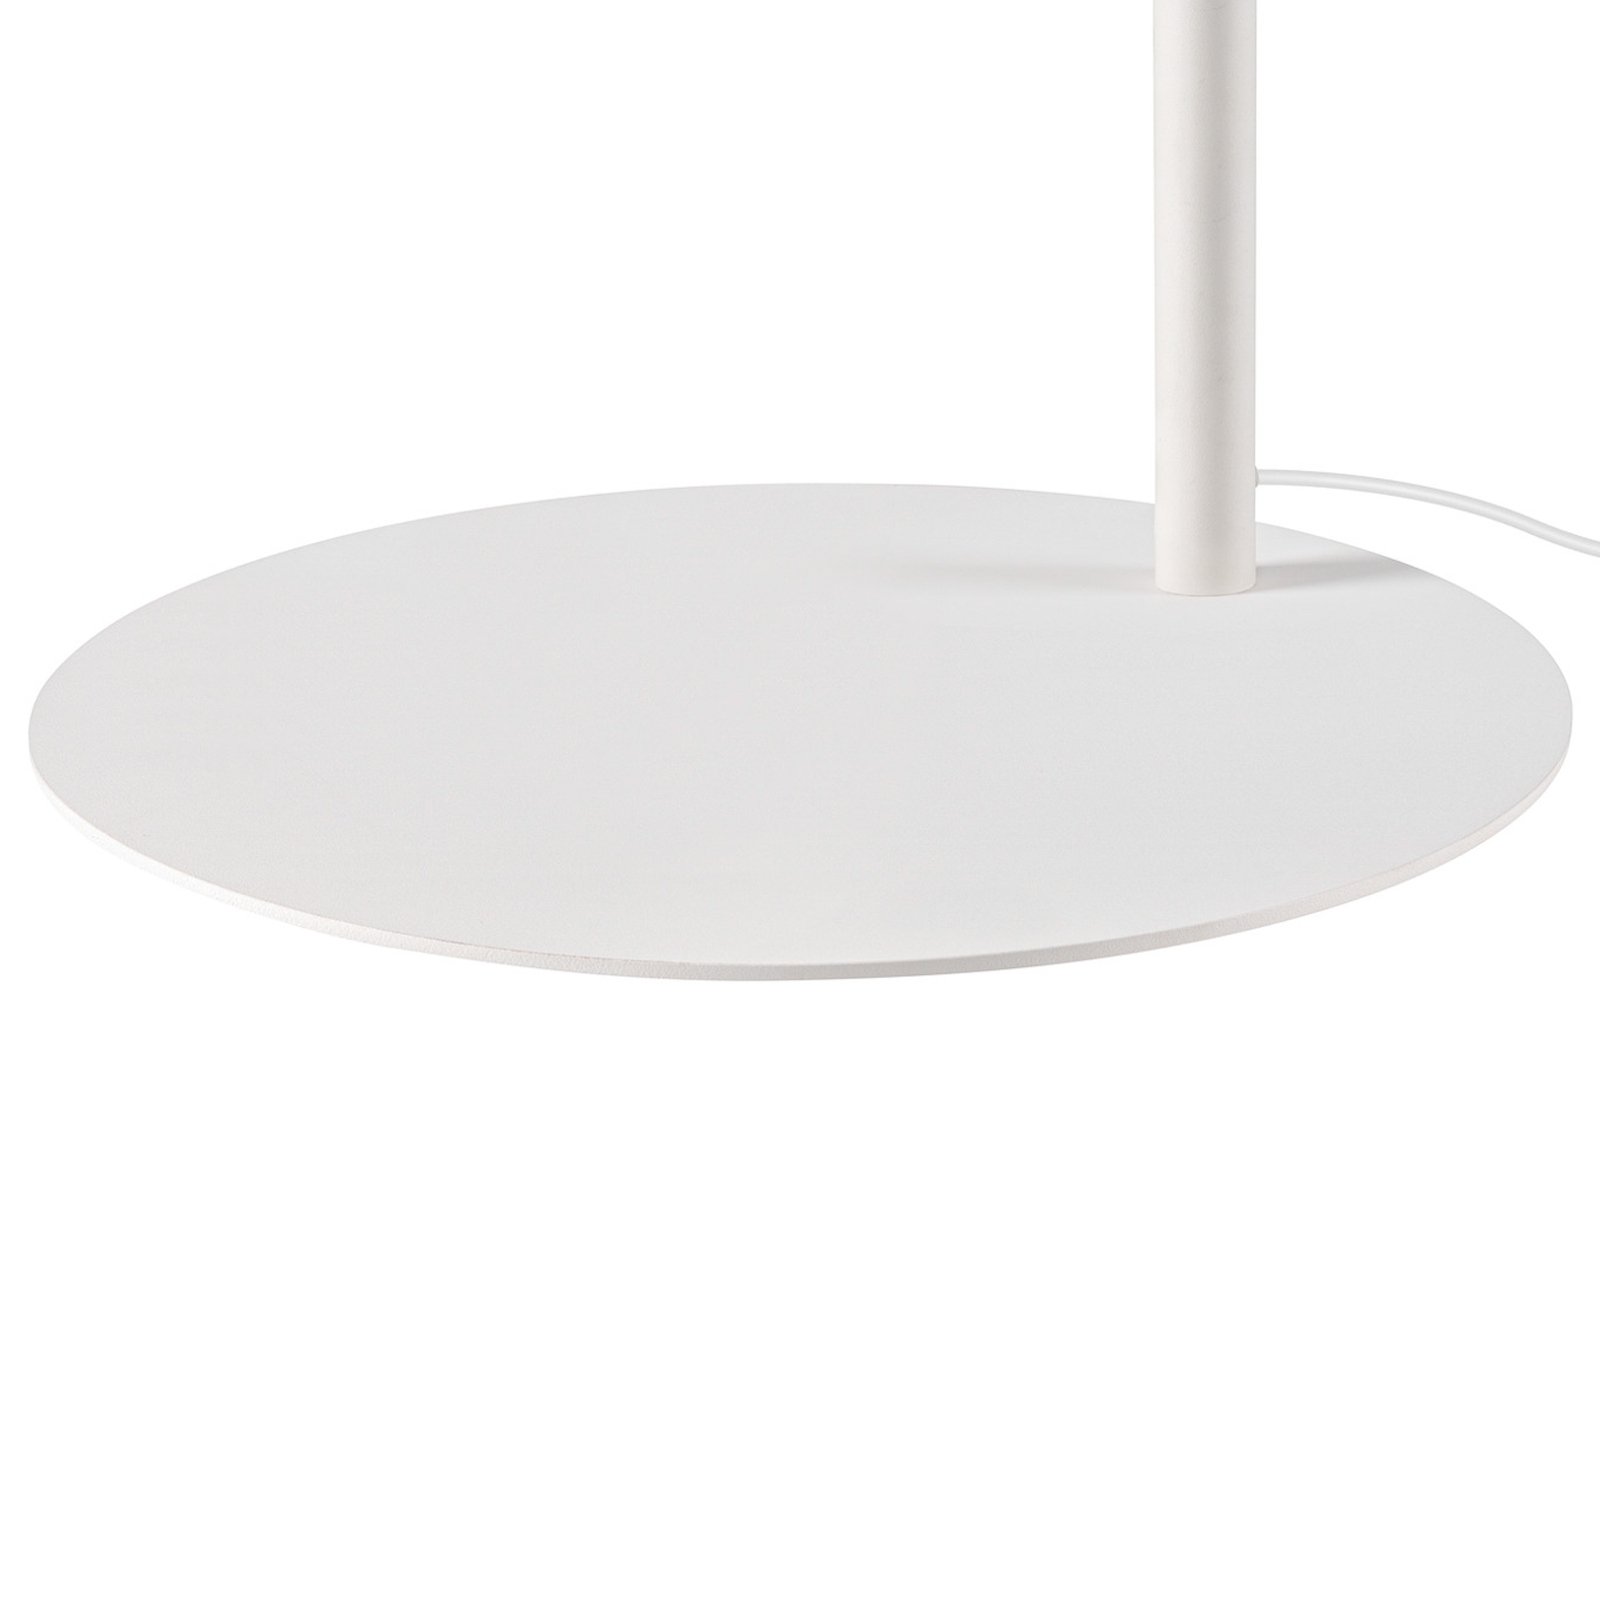 LED vloerlamp One Bow FL, wit, staal, hoogte 232 cm, CCT